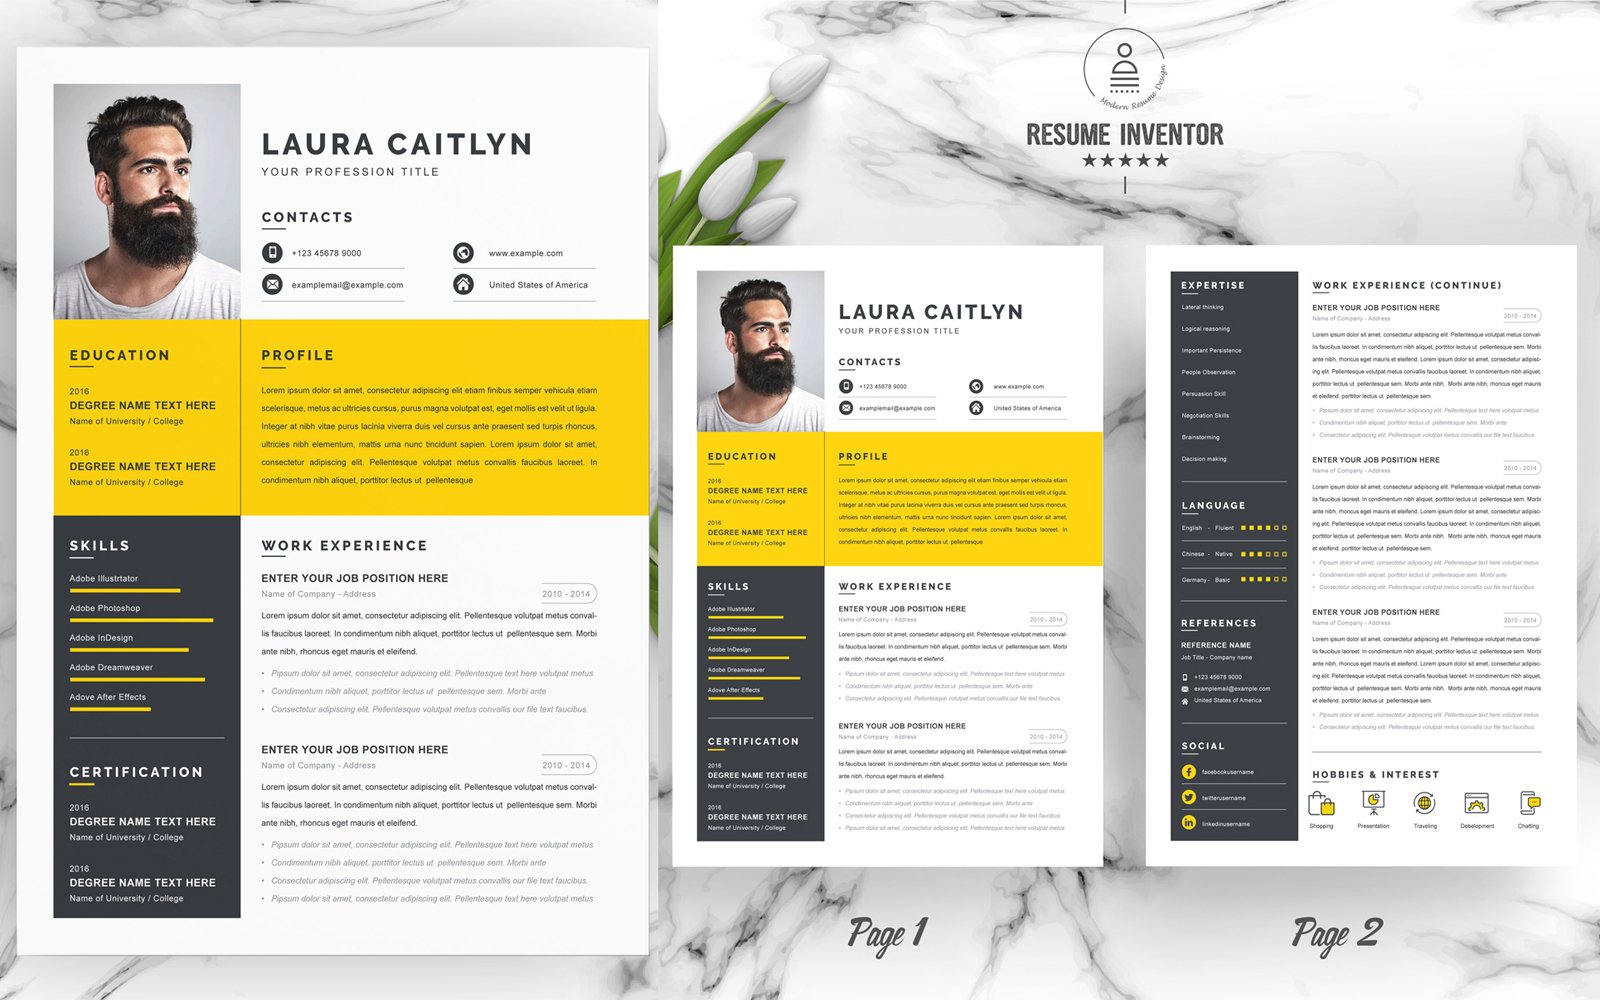 Template #205645 Resume Template Webdesign Template - Logo template Preview